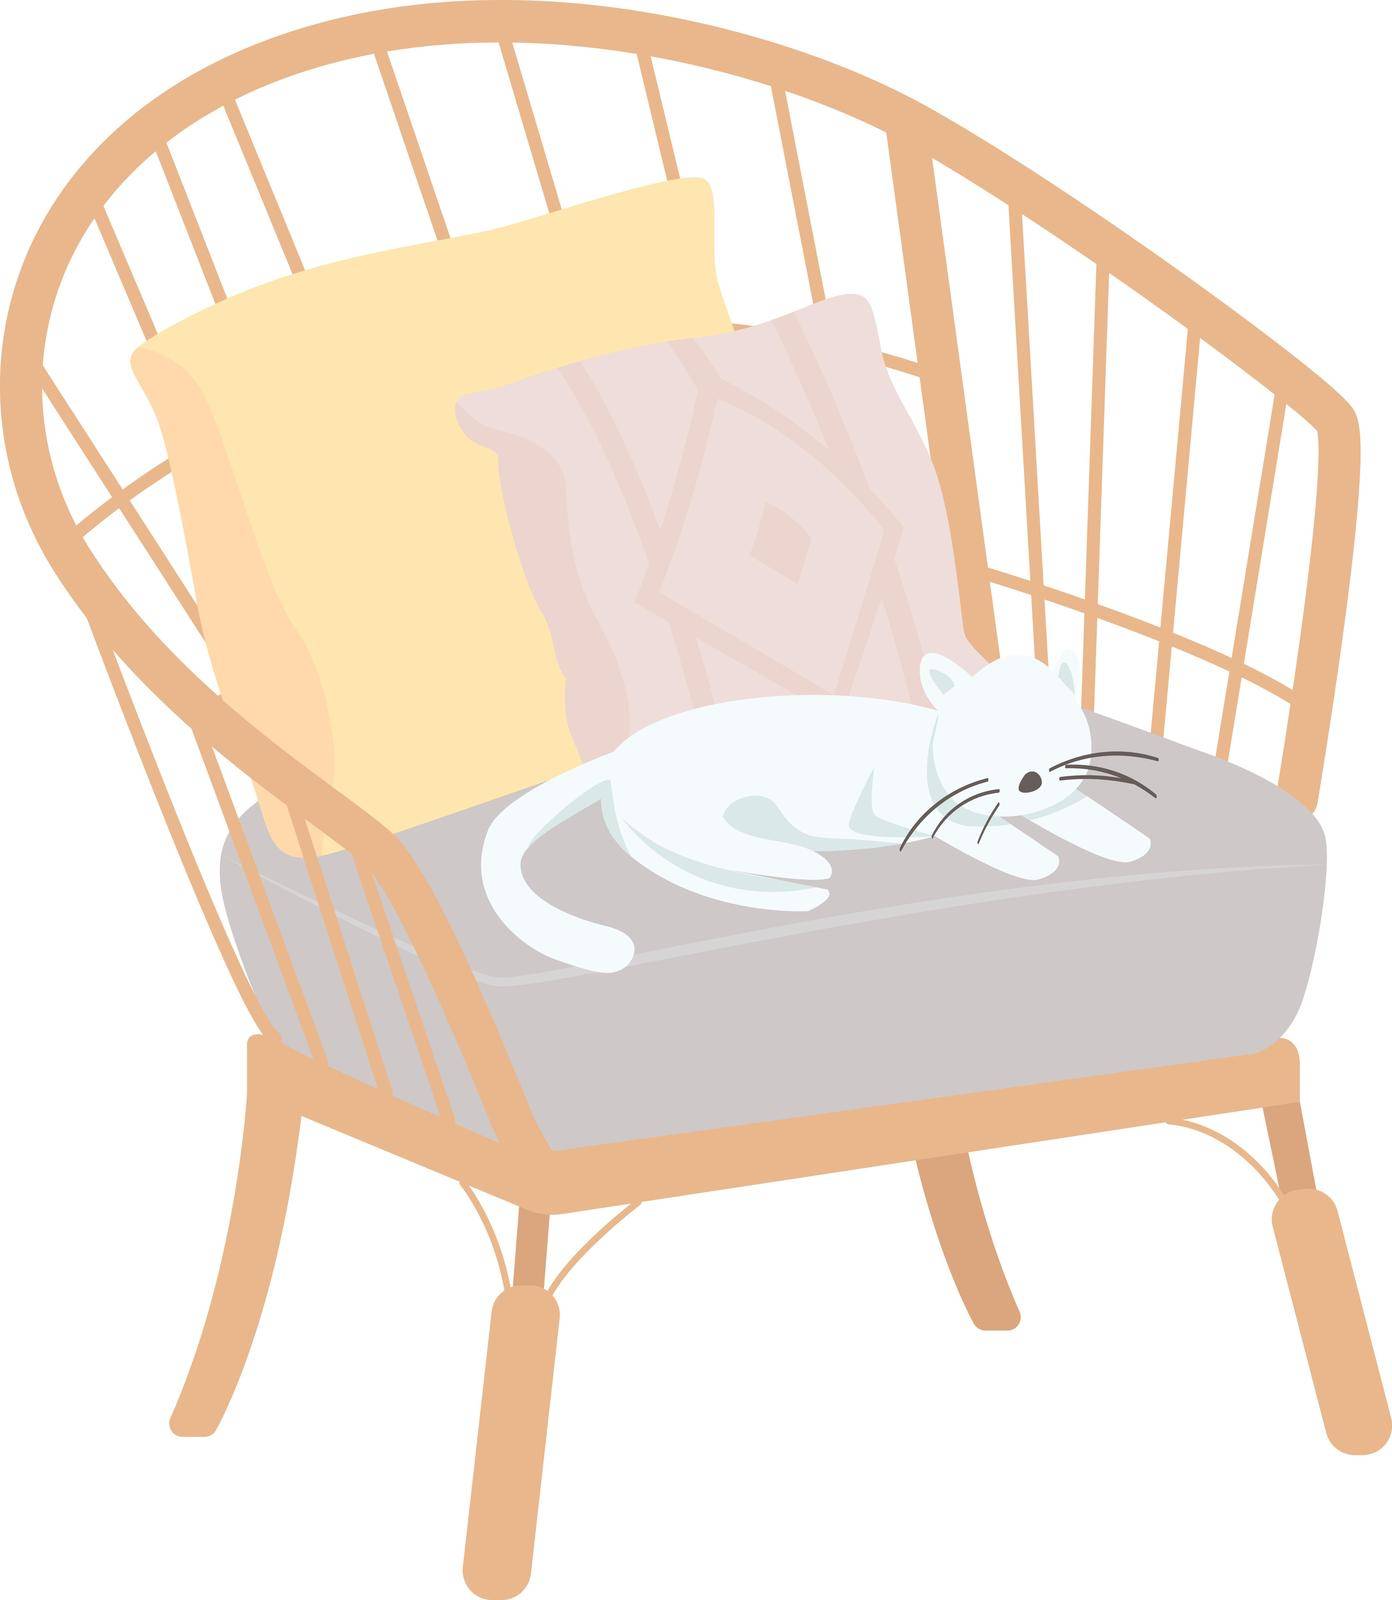 Comfortable armchair with pet semi flat color vector item. Grey chair. Realistic object on white. Interior isolated modern cartoon style illustration for graphic design and animation